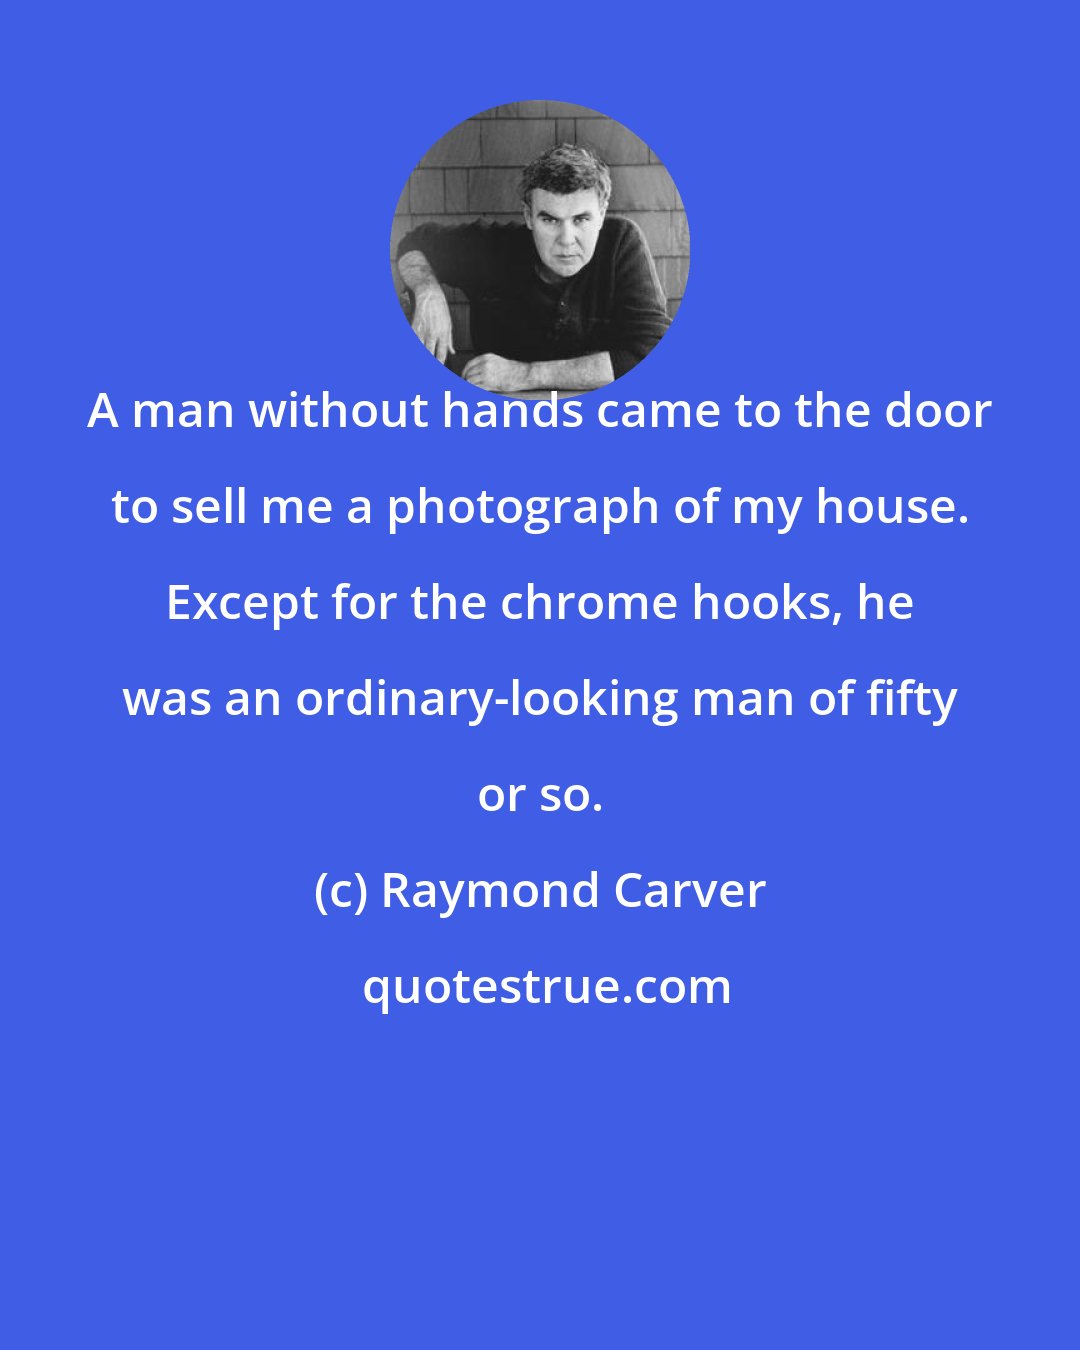 Raymond Carver: A man without hands came to the door to sell me a photograph of my house. Except for the chrome hooks, he was an ordinary-looking man of fifty or so.